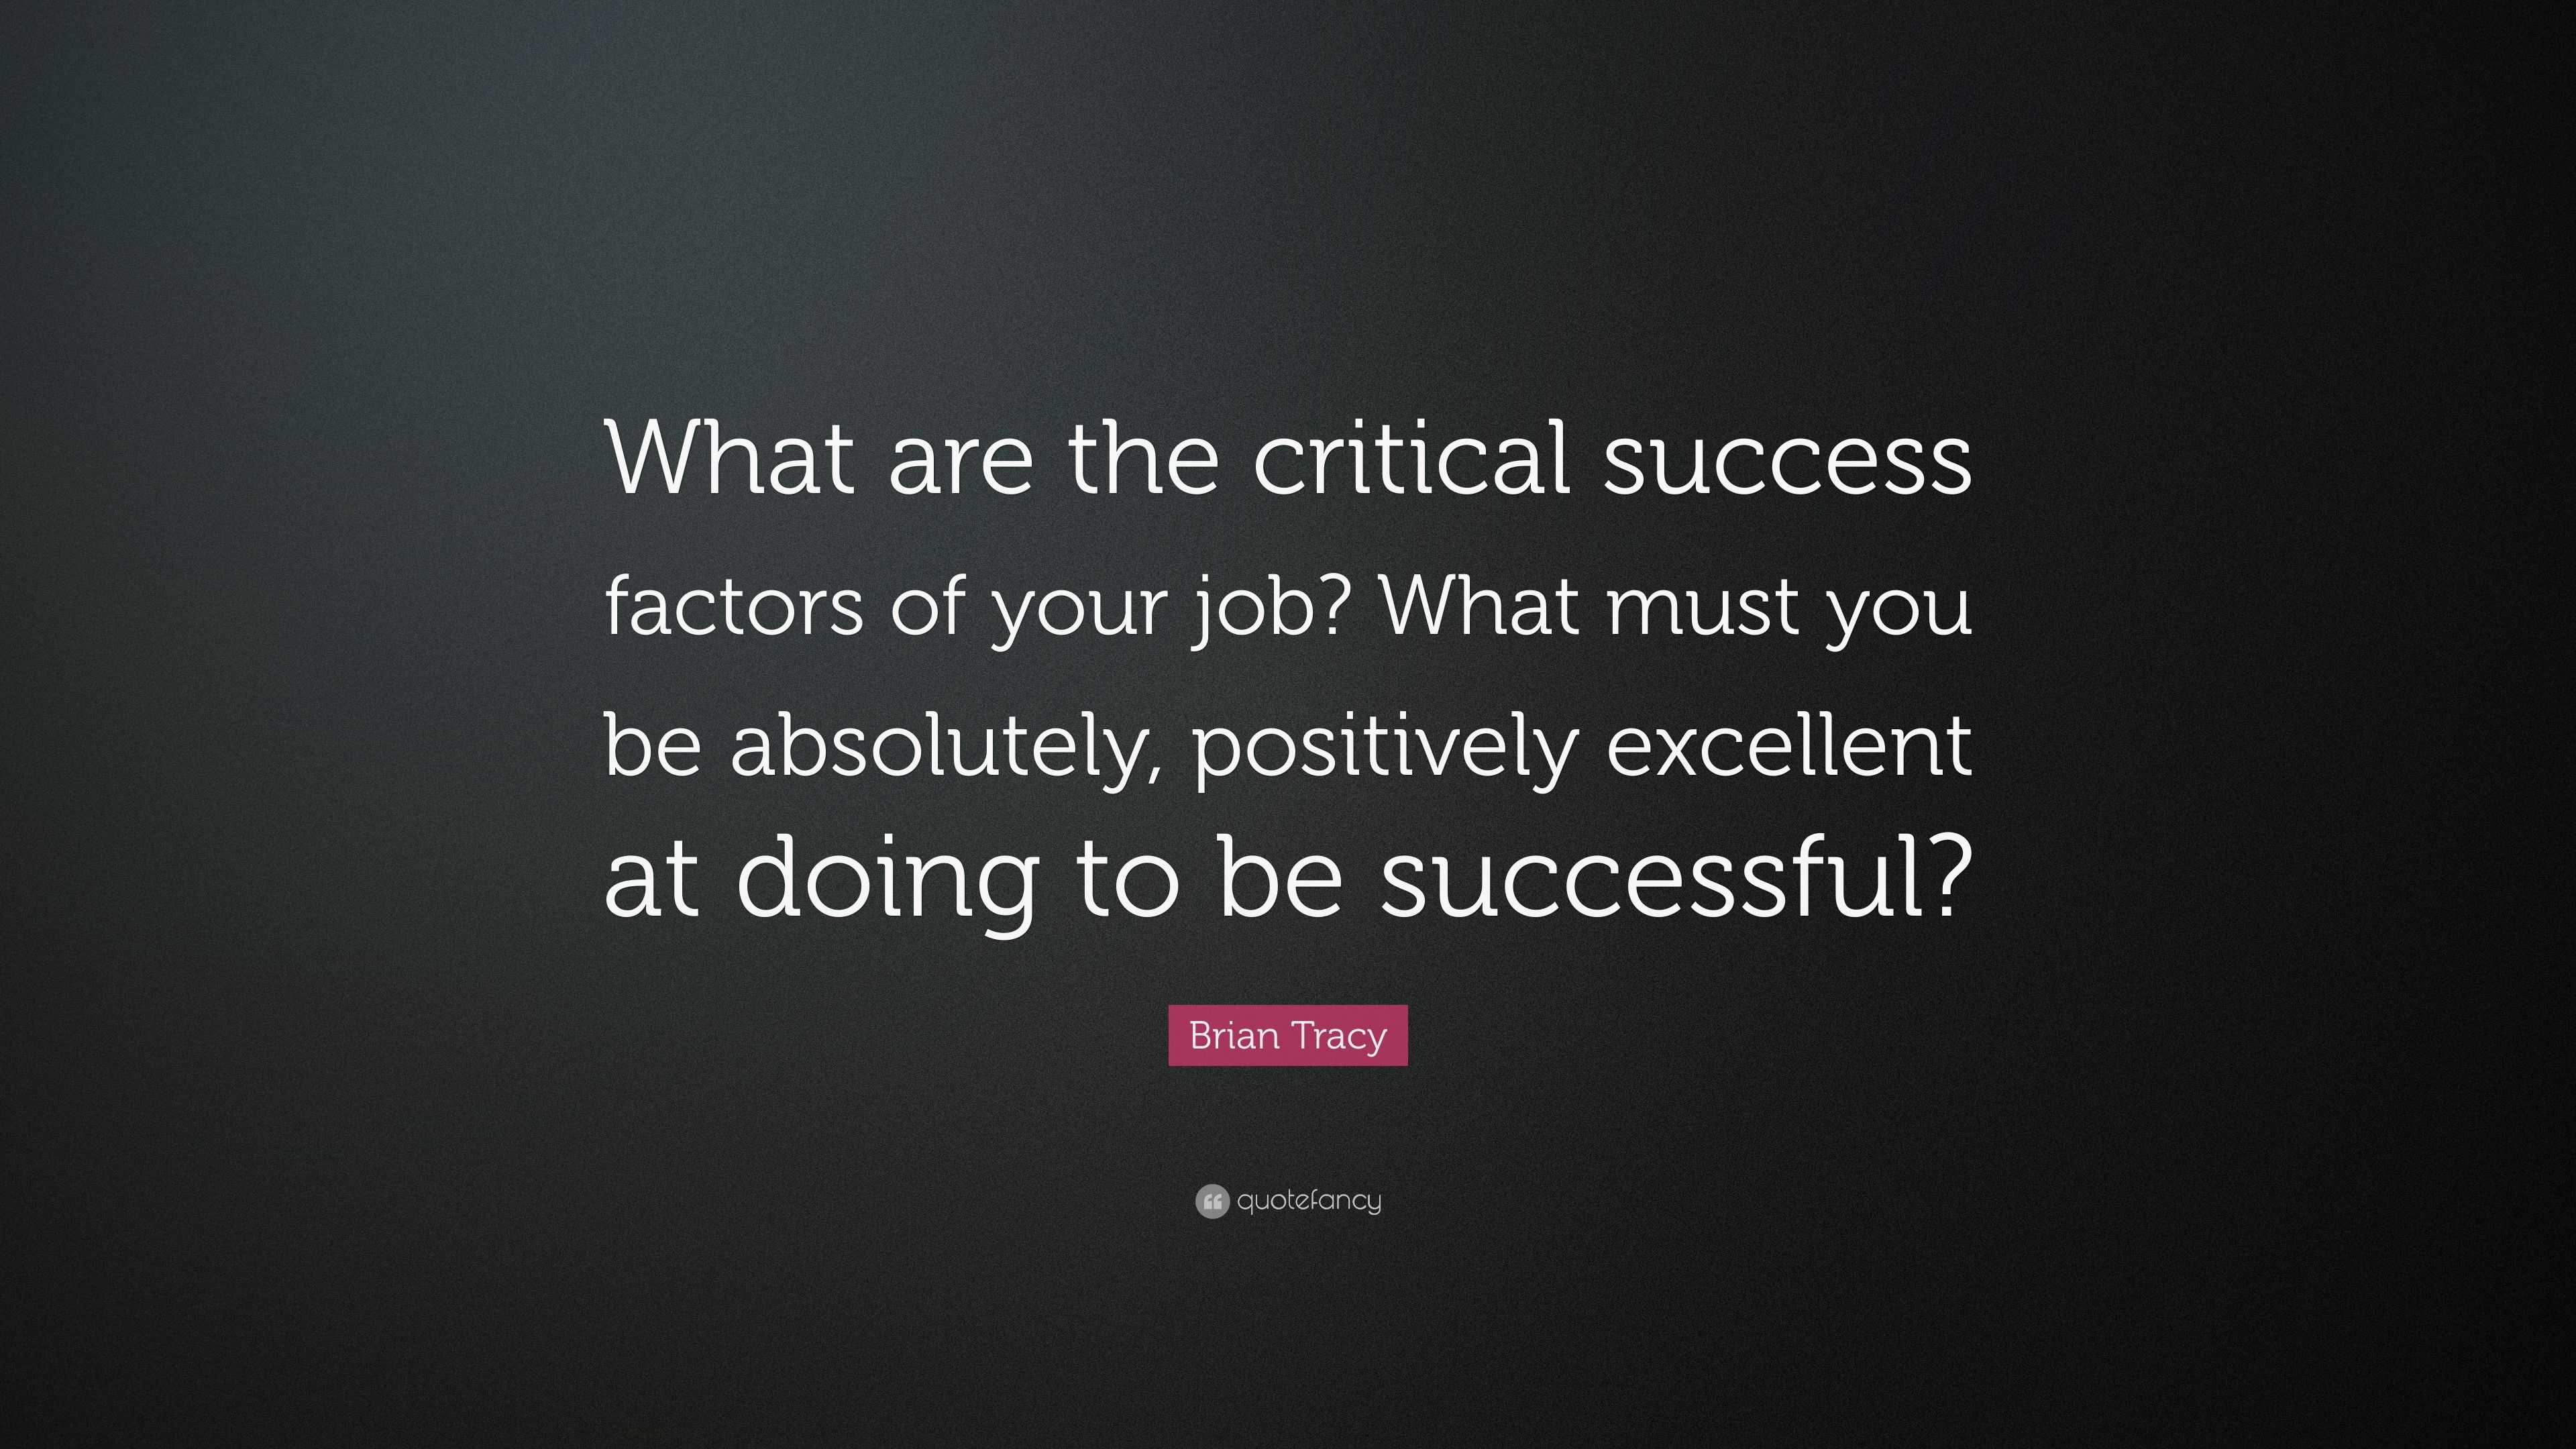 Brian Tracy Quote: “What are the critical success factors of your job ...